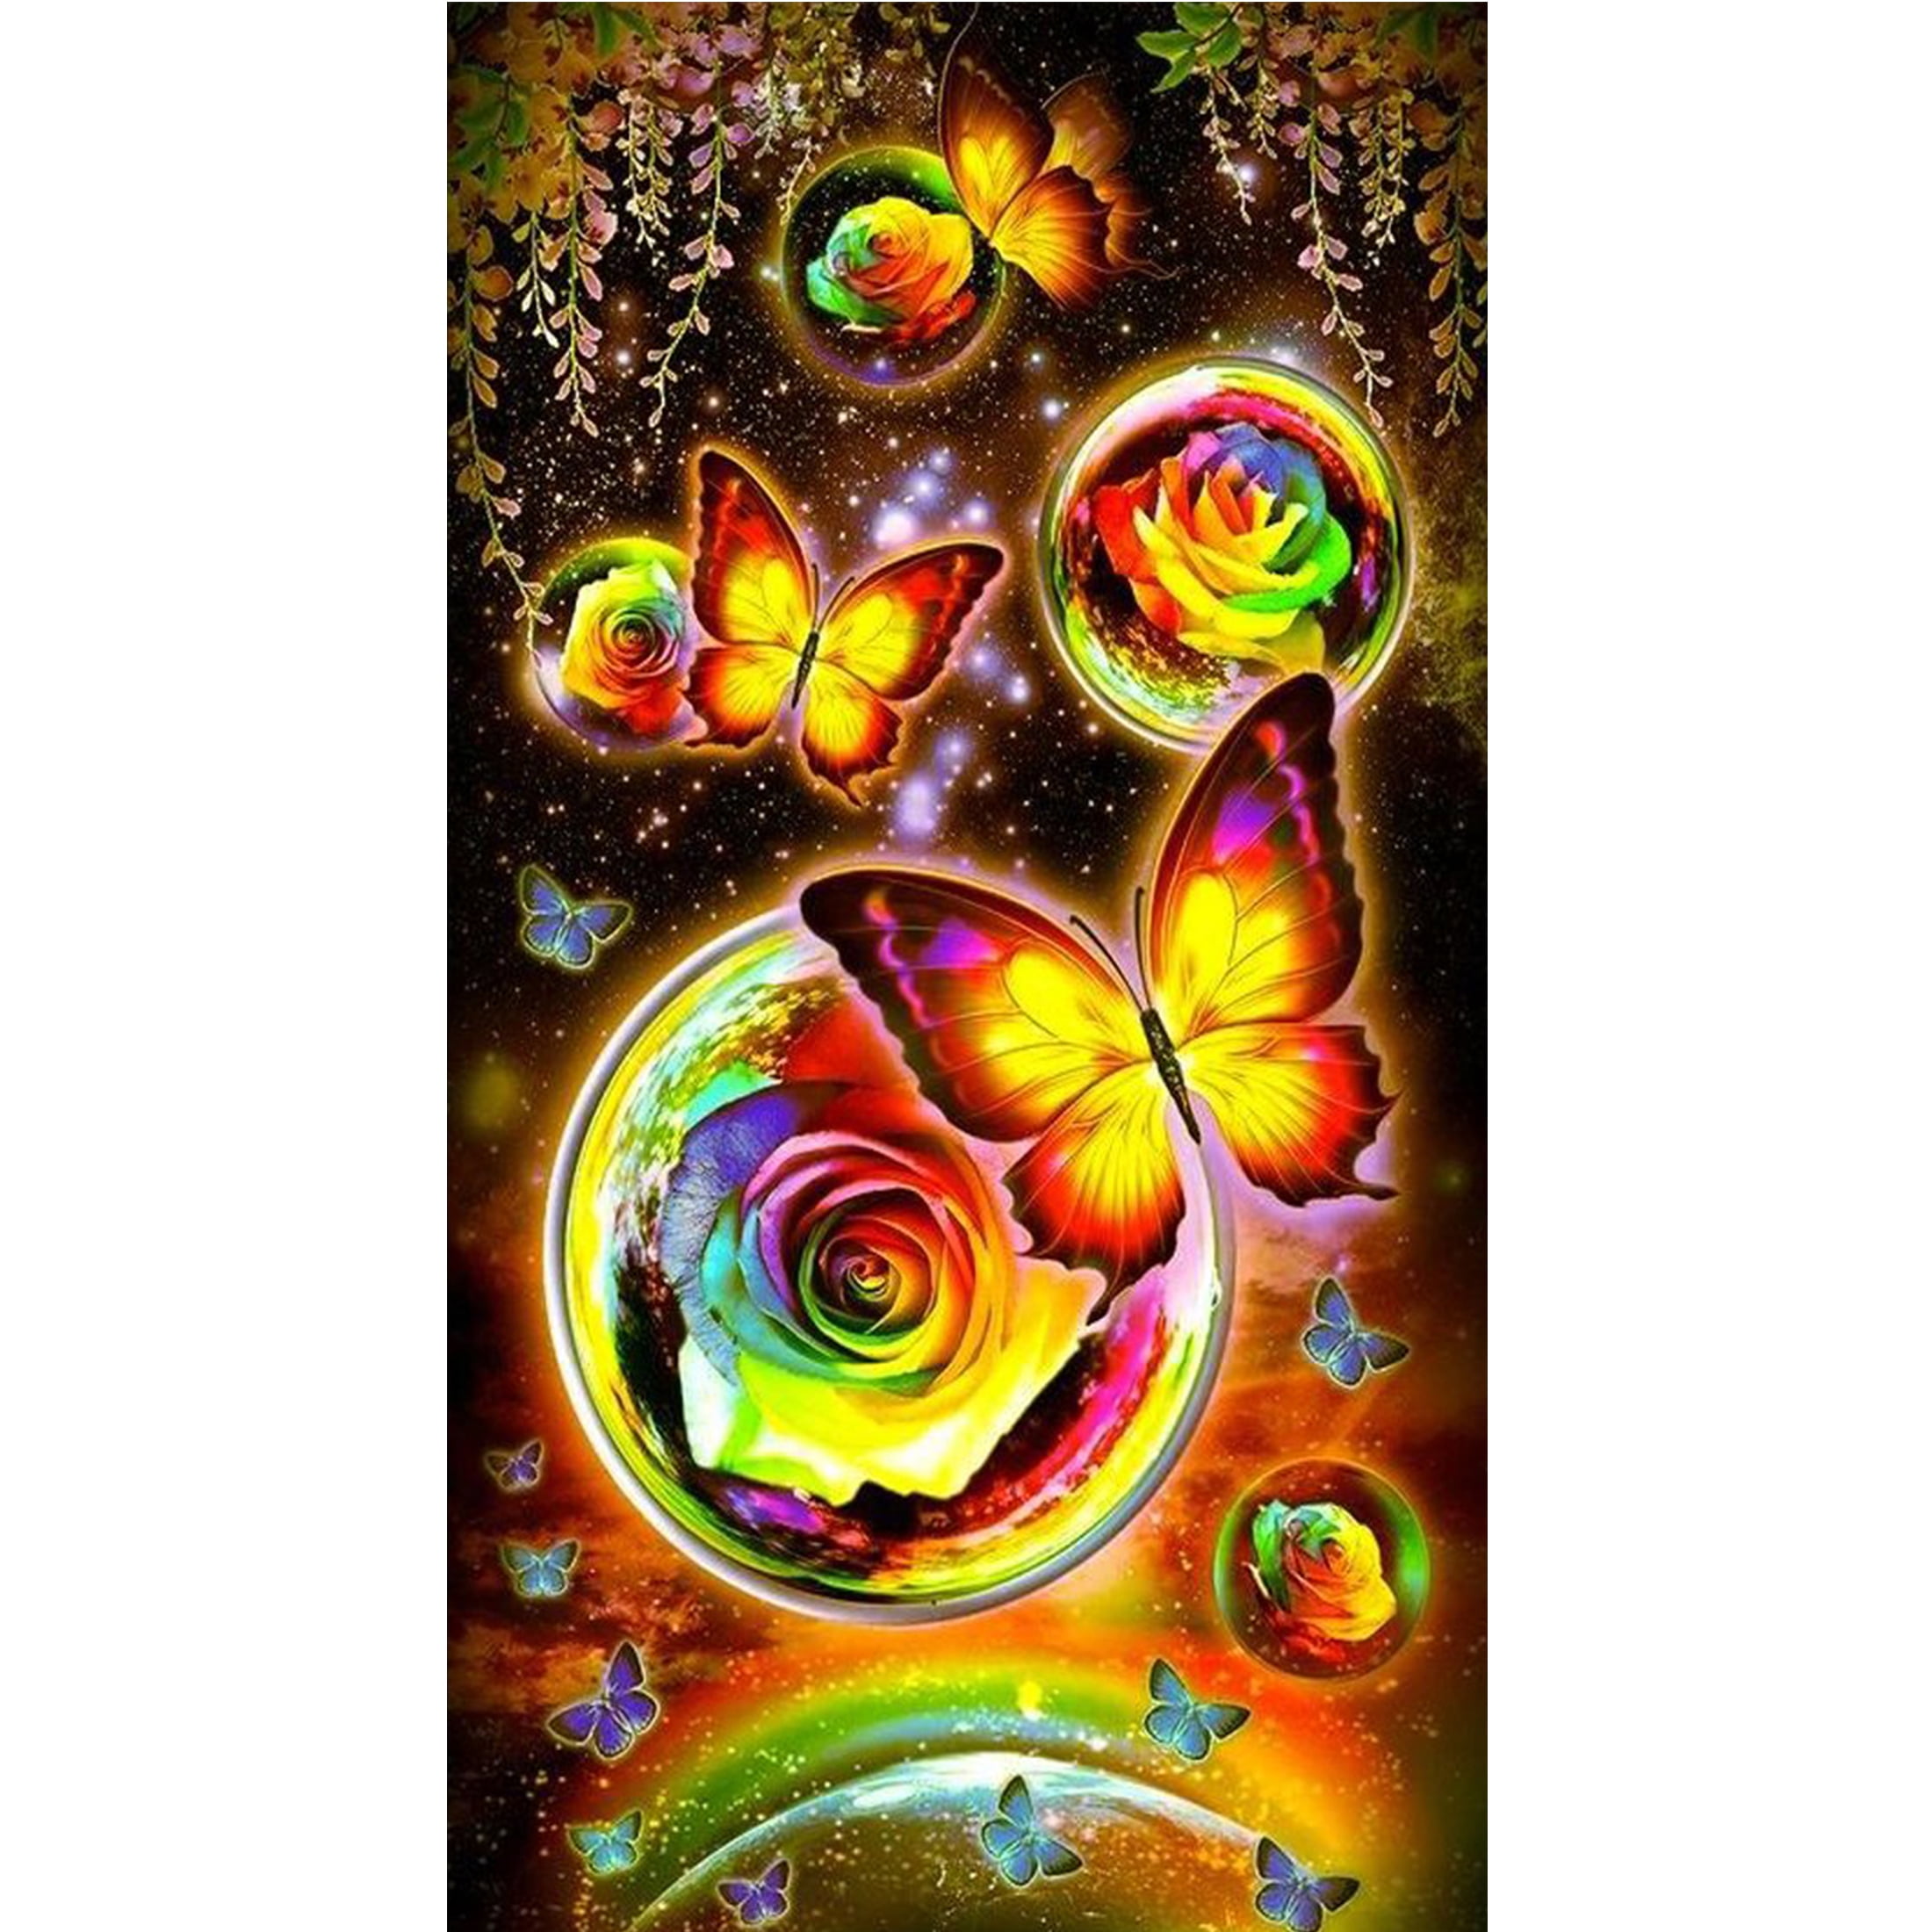 YALKIN Universe Large Diamond Painting Kits for Adults (70X40cm/ 27.6x15.7in), DIY 5D Diamond Art Kits for Adults, Full Round Drill Embroidery Cross